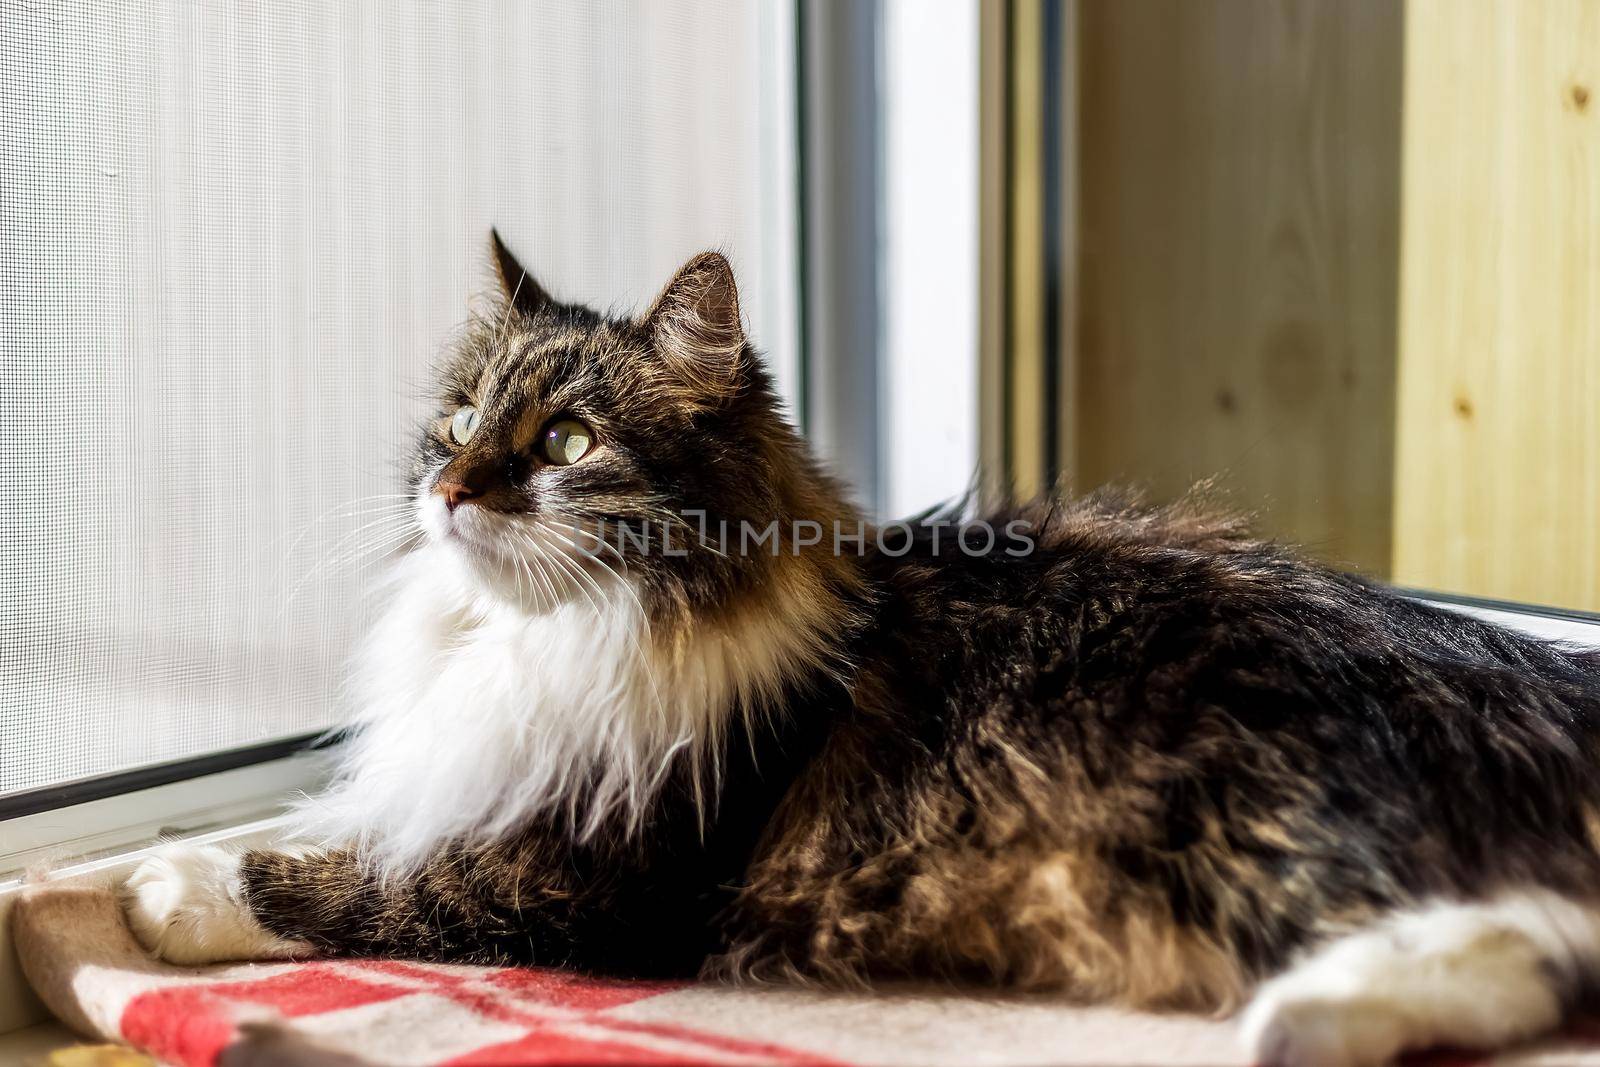 A fluffy gray and white cat lies on a checkered blanket on the windowsill and looks out the window, taking care of pets